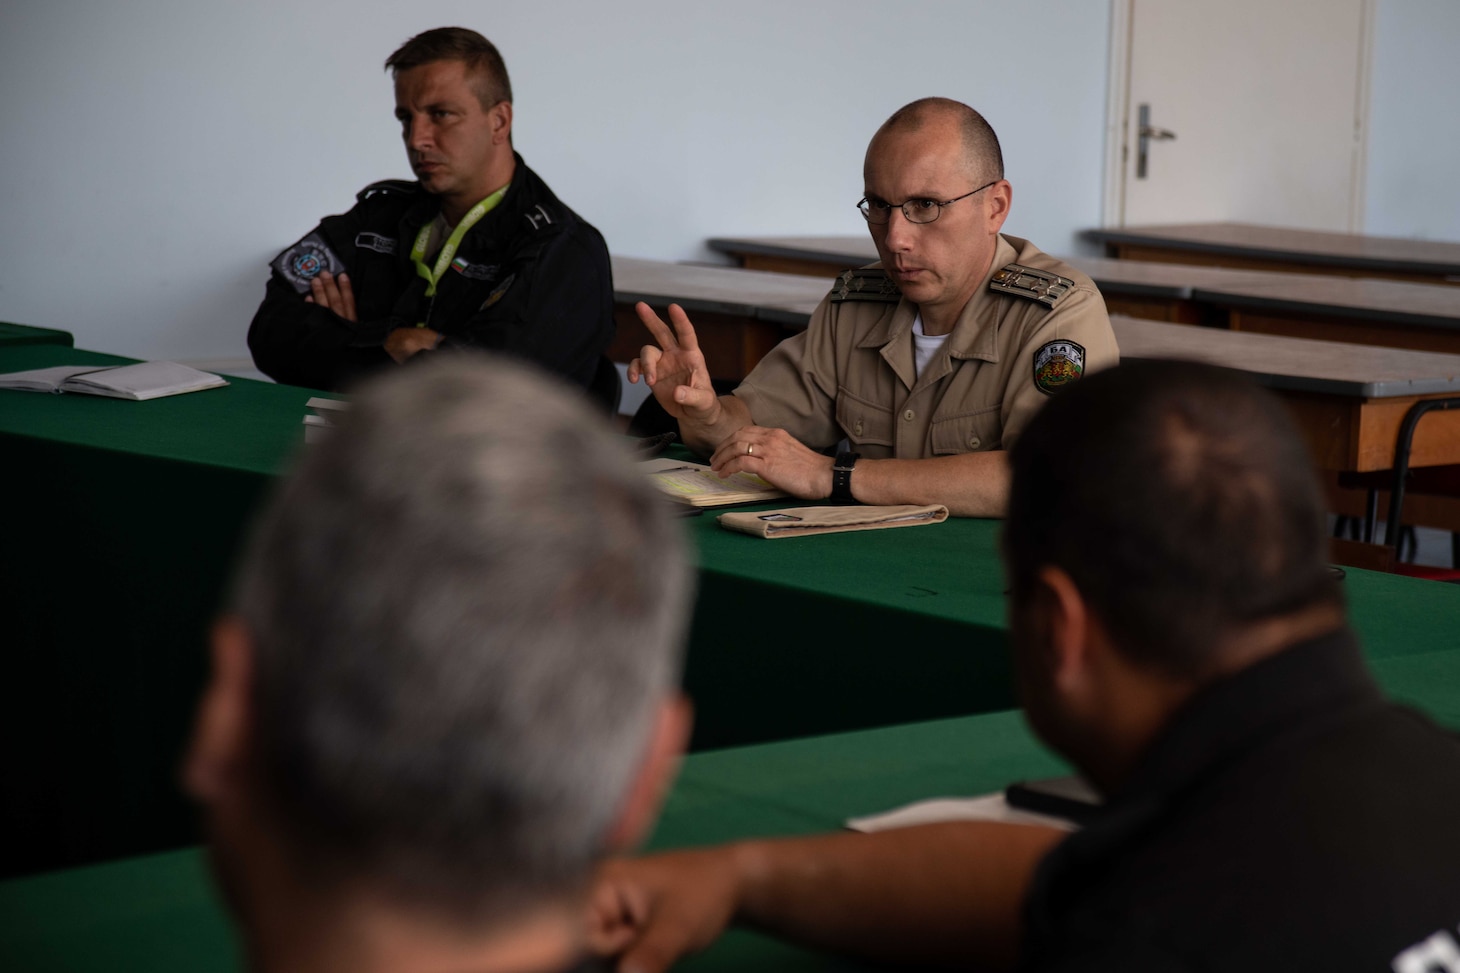 Bulgarian Navy Capt. Daniel Todorov, commander, Auxiliary Ships Squadron, asks questions about U.S. floating mine response procedures during the knowledge exchange portion of exercise Breeze 2022, July 14. Breeze 2022 enhances interoperability among Bulgaria and participating nations, with an emphasis on anti-submarine warfare, search and rescue, force protection/anti-terrorism operations, maritime interdiction operations, and anti-piracy mission areas.